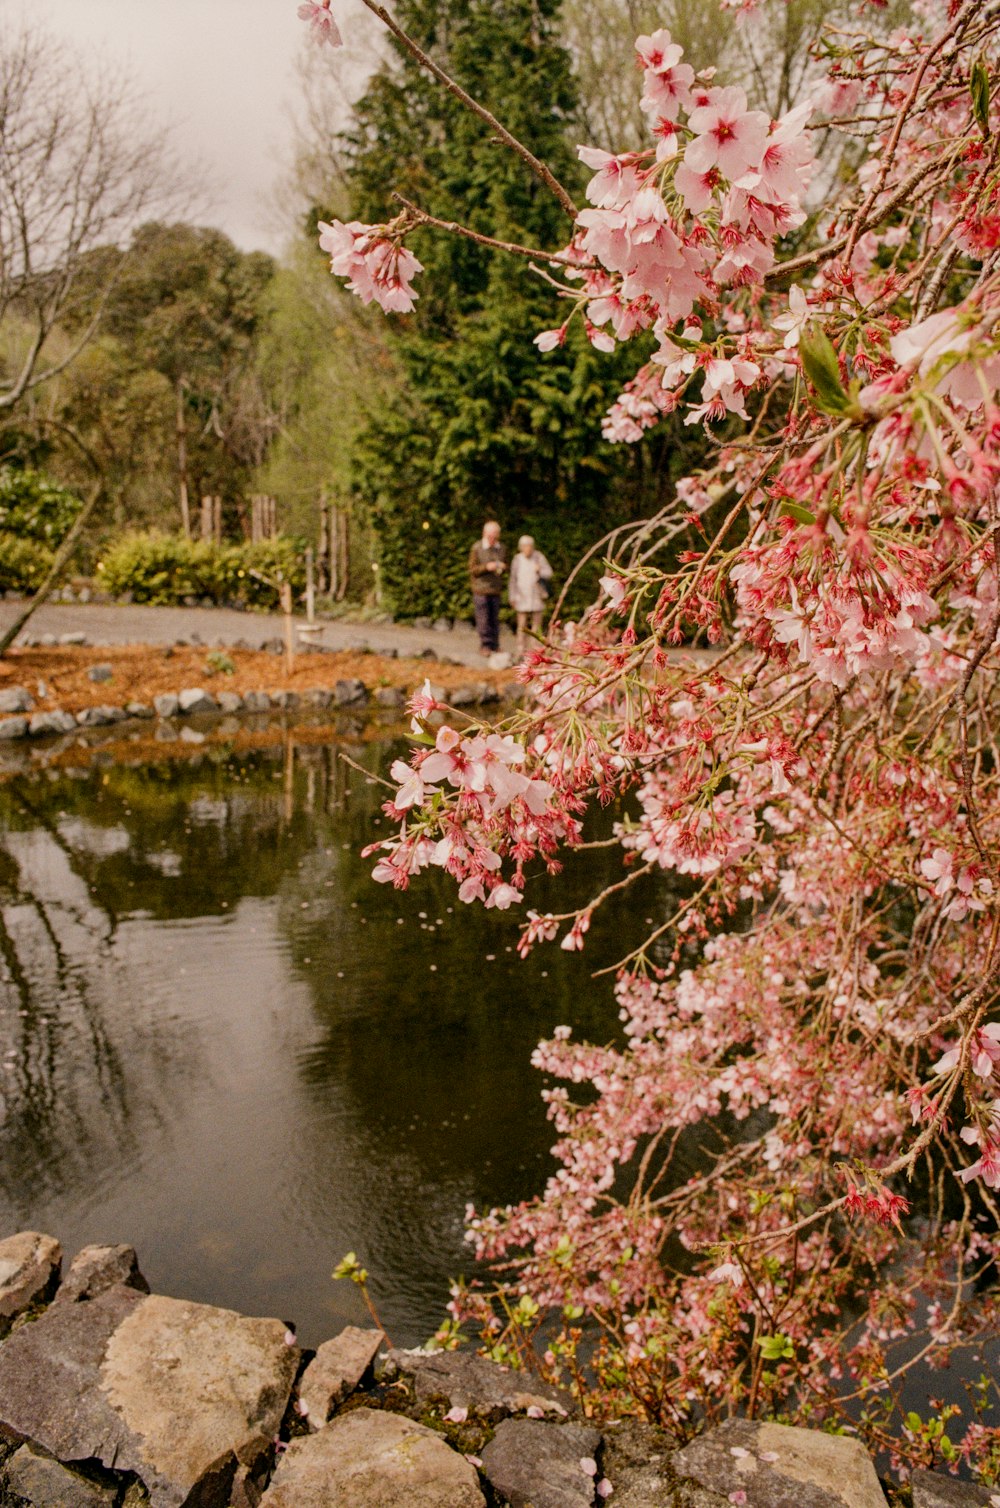 a pond surrounded by rocks and flowers